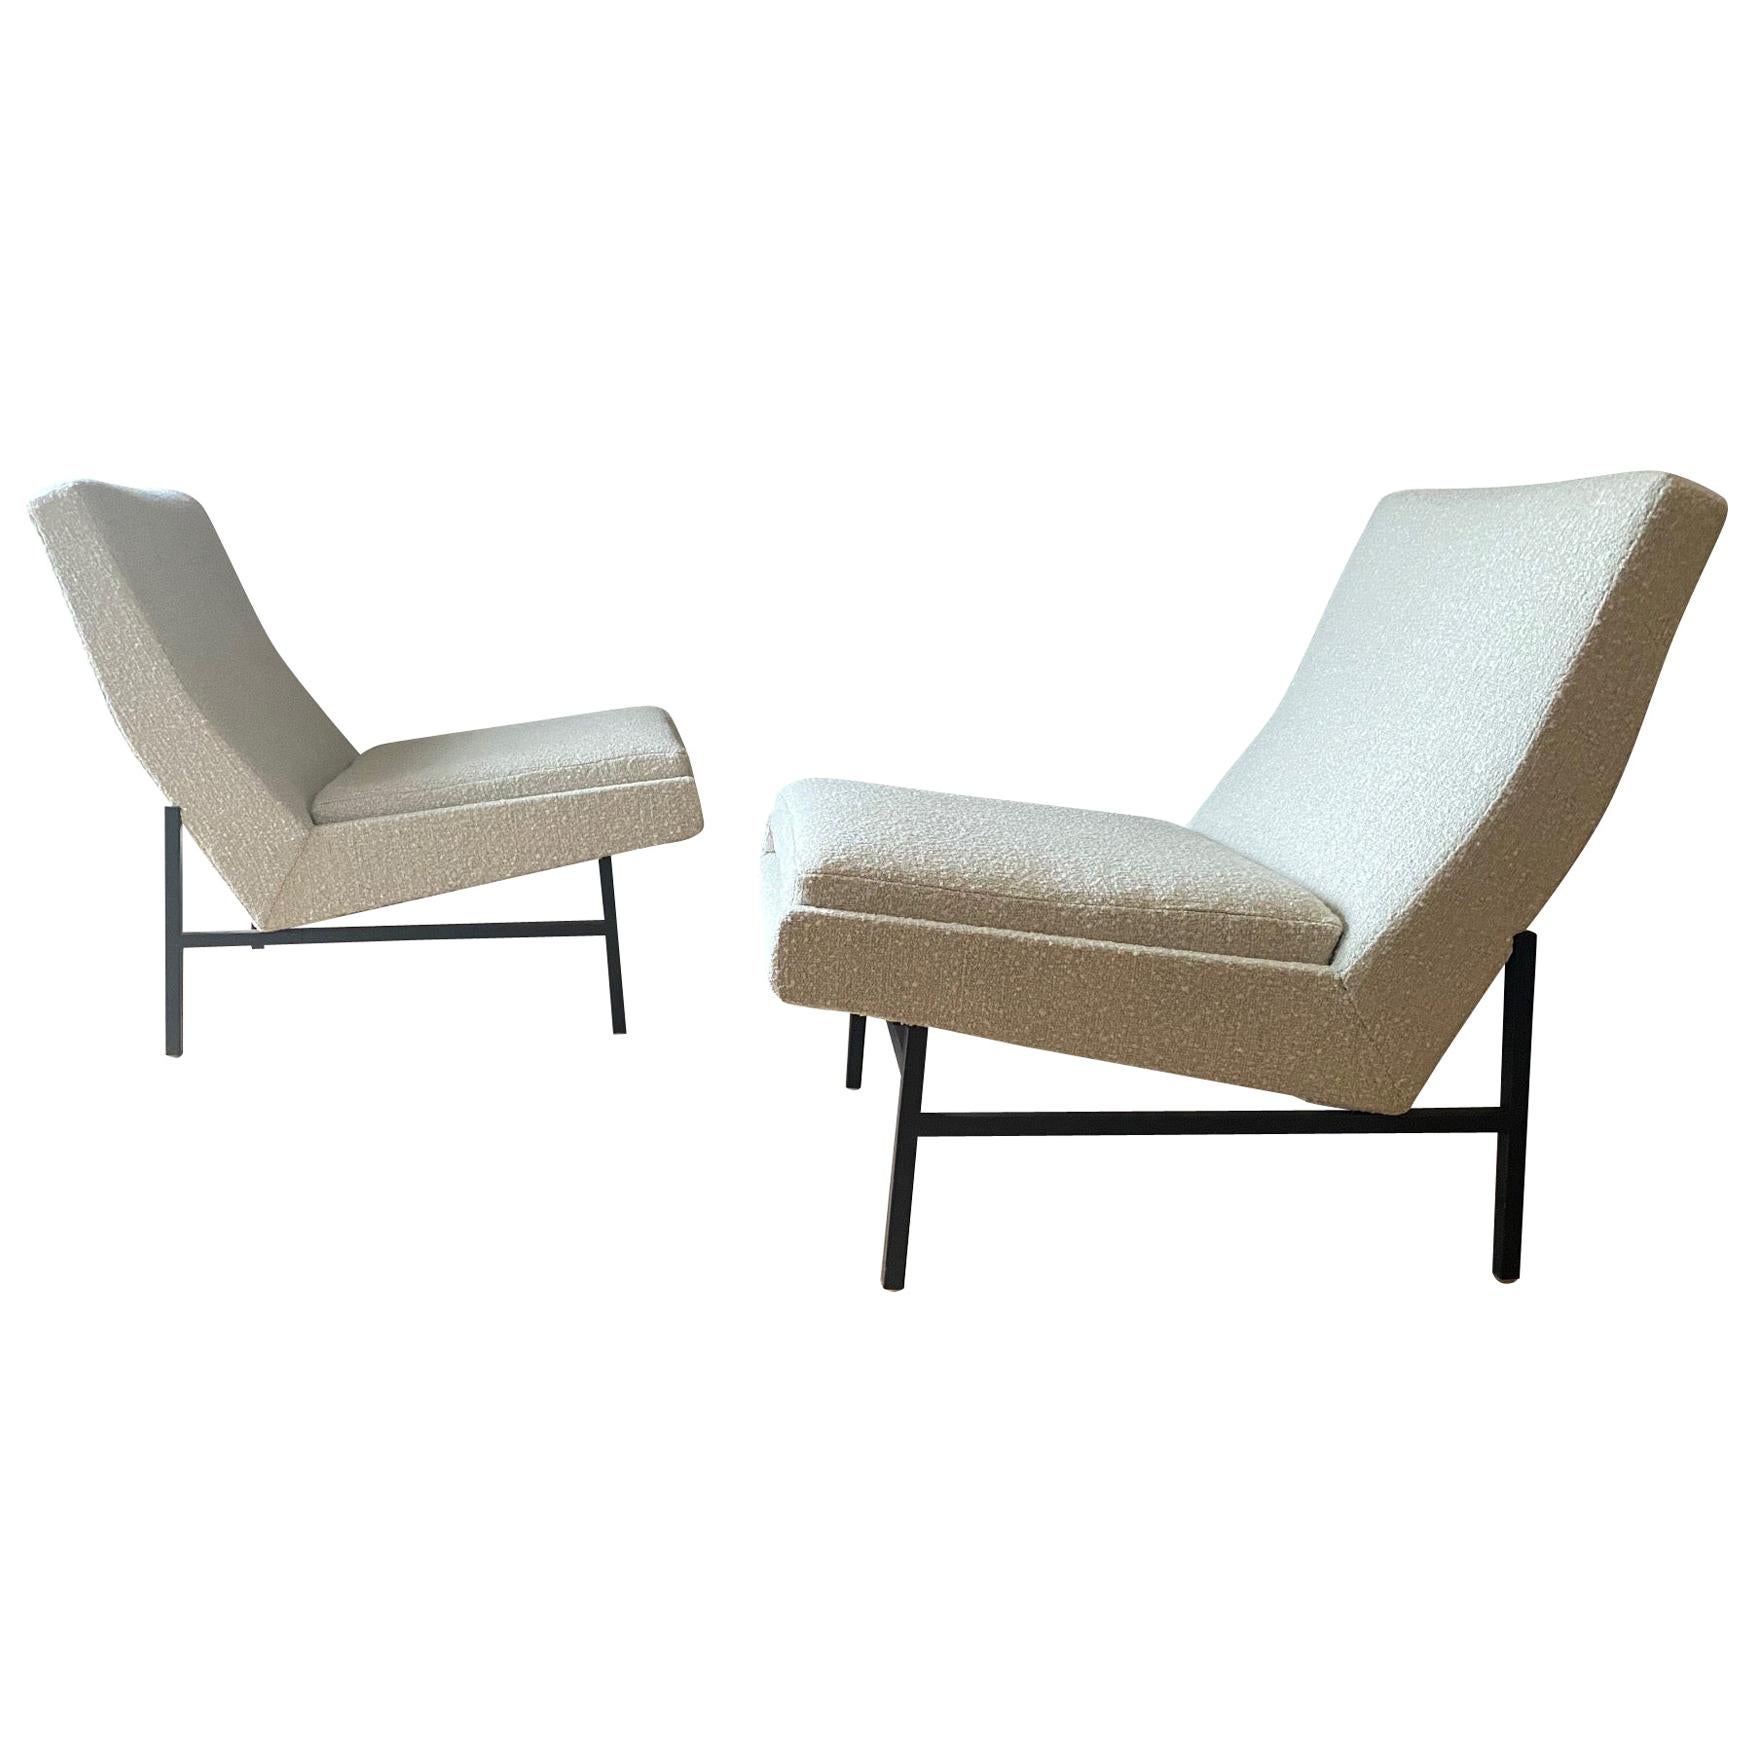 Armless Pair of Upholstered Side Chairs by ARP Steiner, France, Midcentury